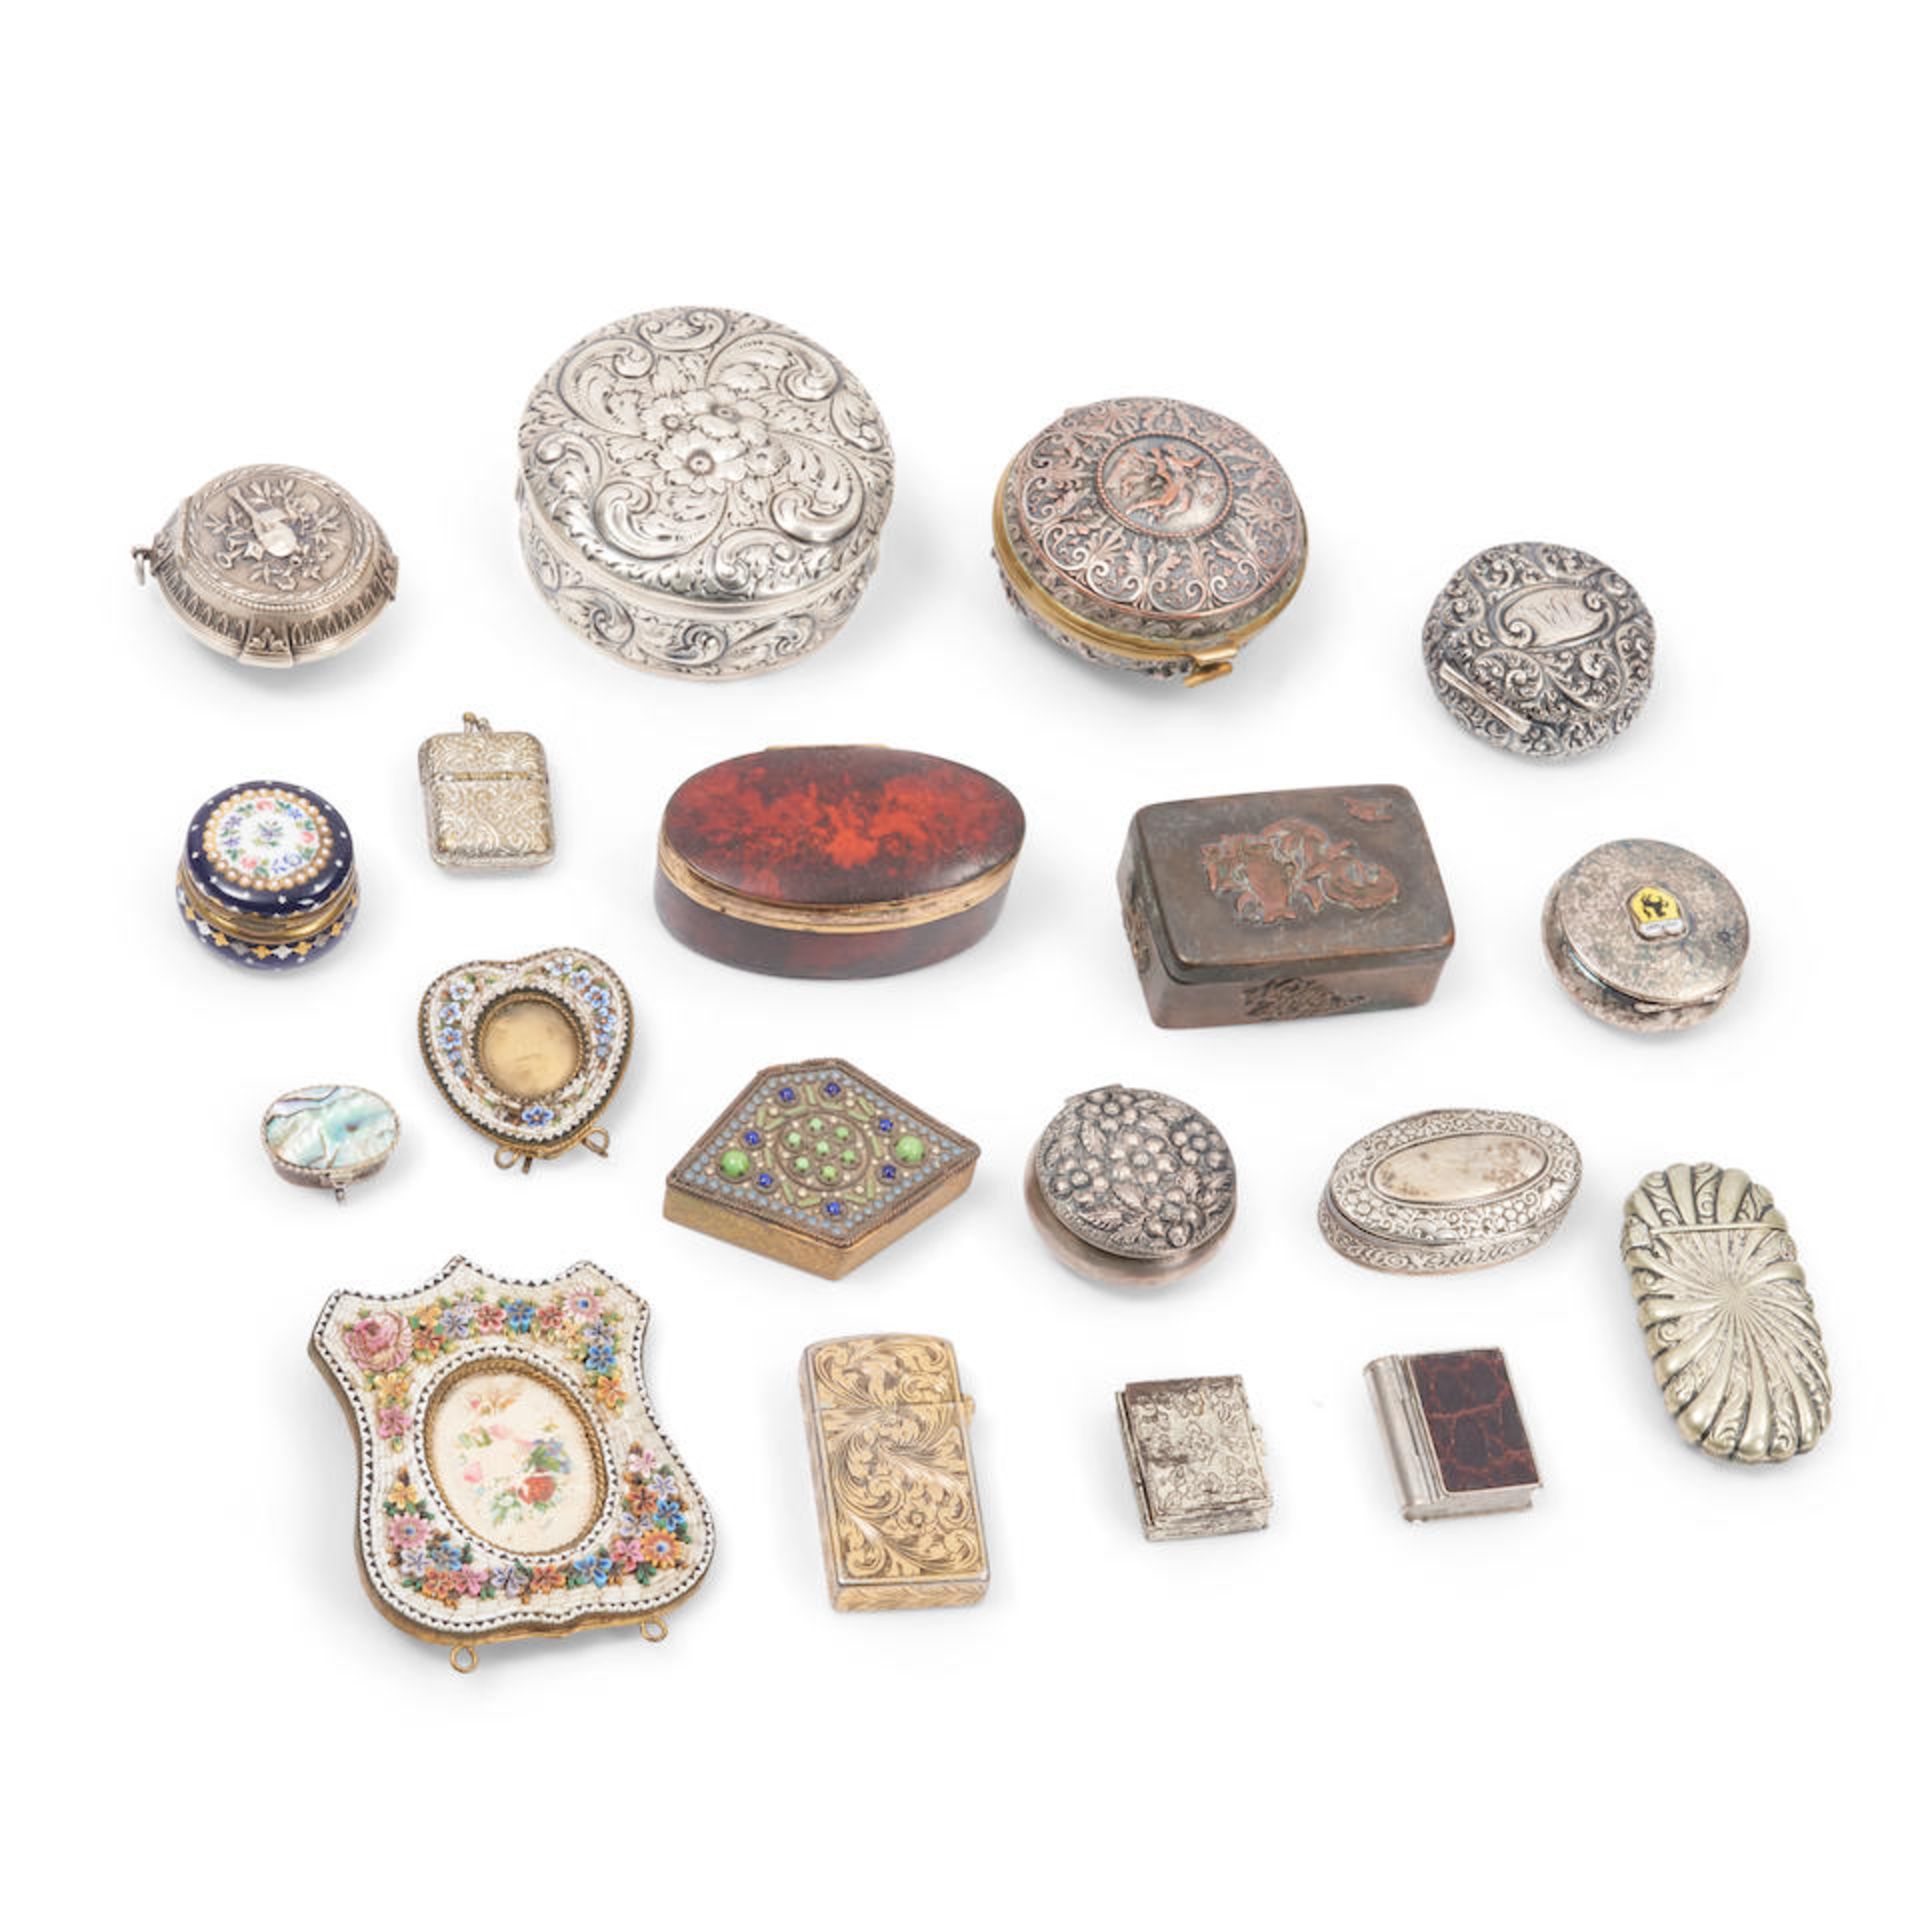 NINETEEN STERLING SILVER, SILVER-PLATED, AND MIXED METAL BOXES AND ACCESSORIES